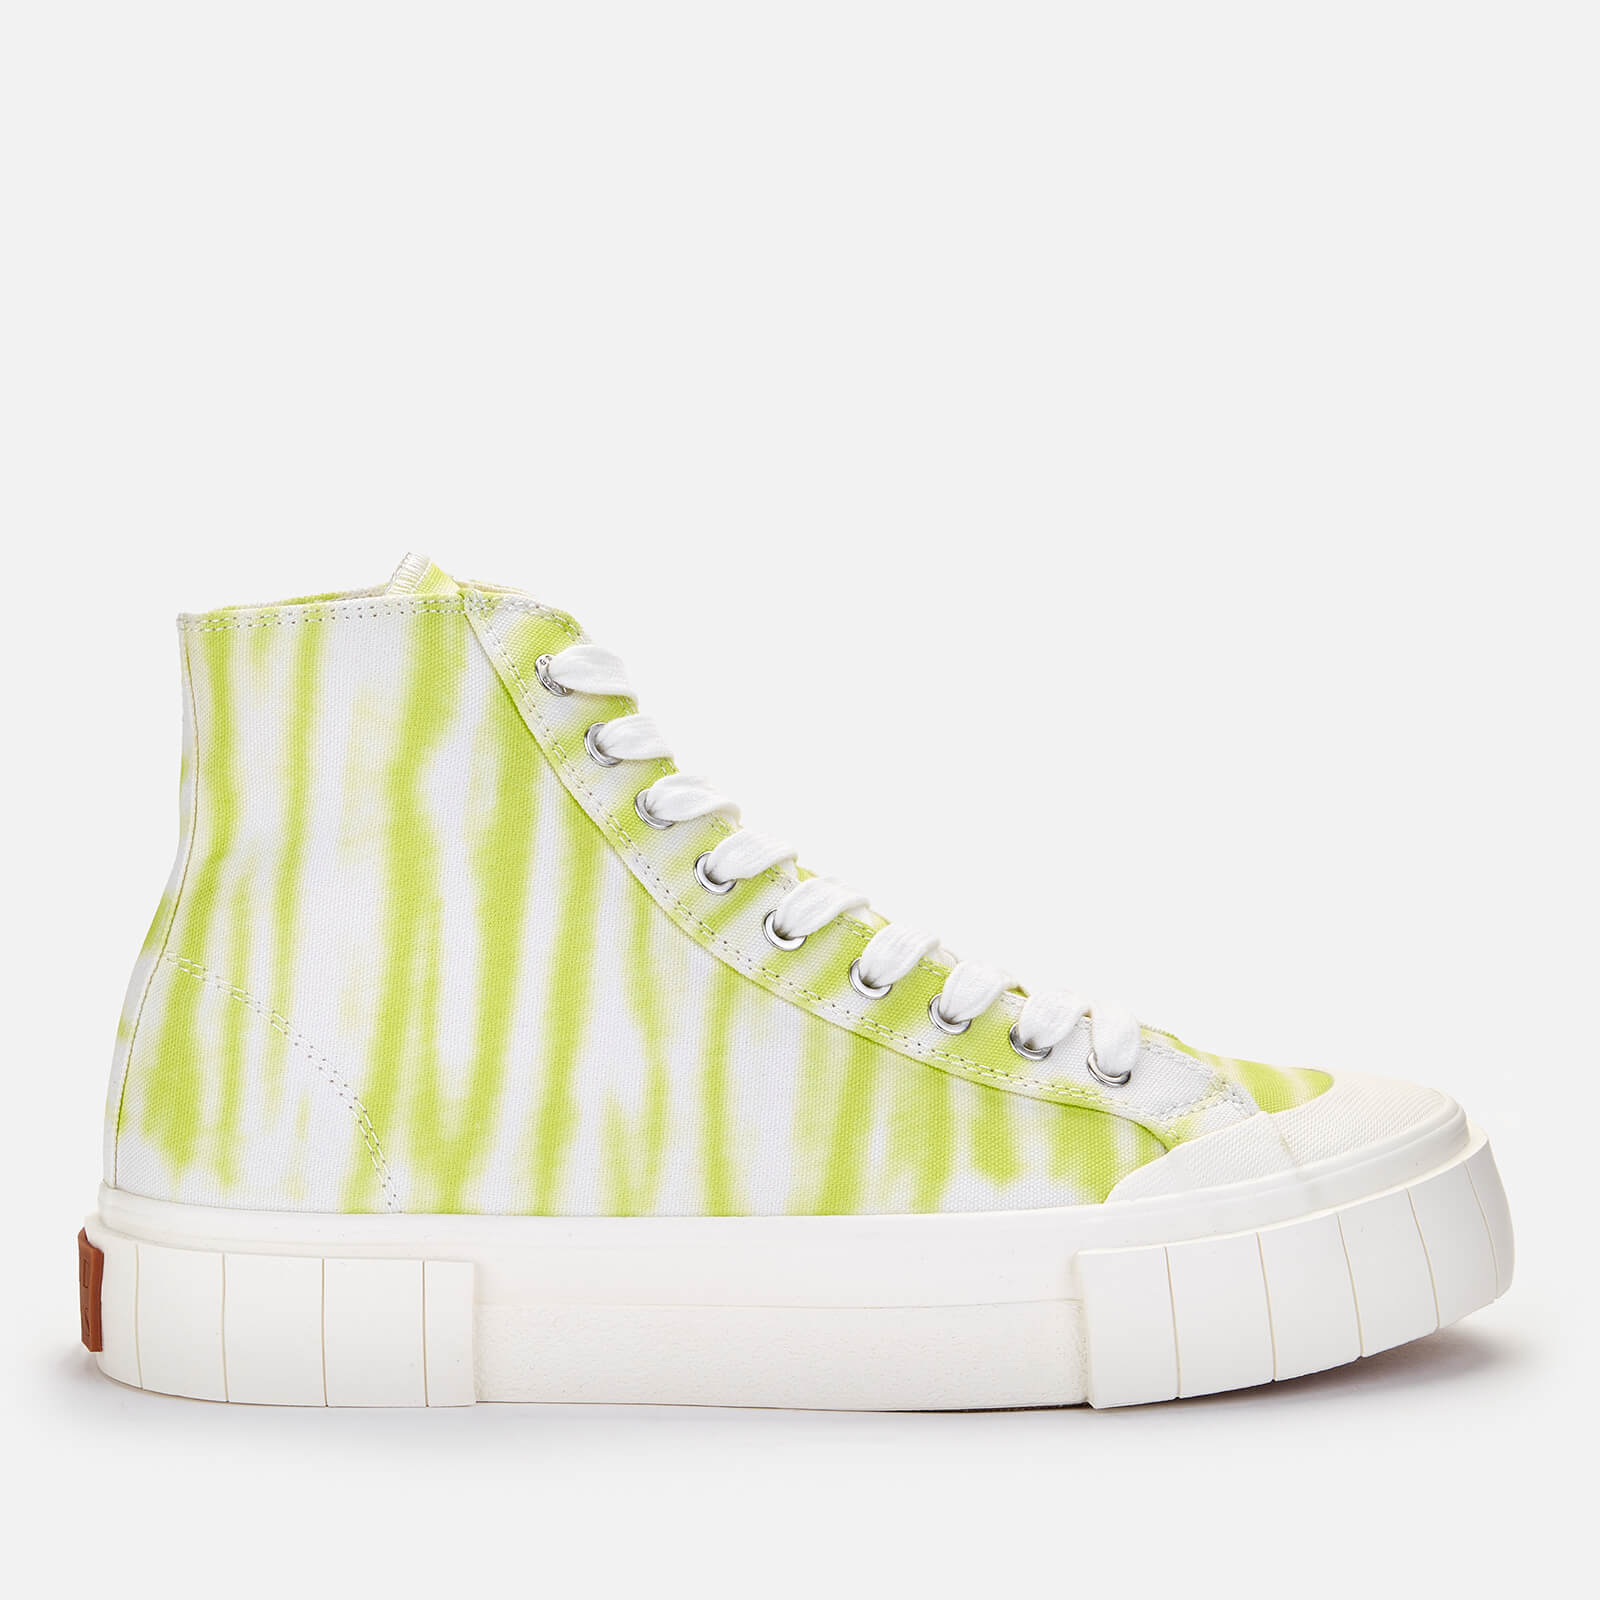 Good News Men's Ombre Palm Hi-Top Trainers - Lime - UK 8